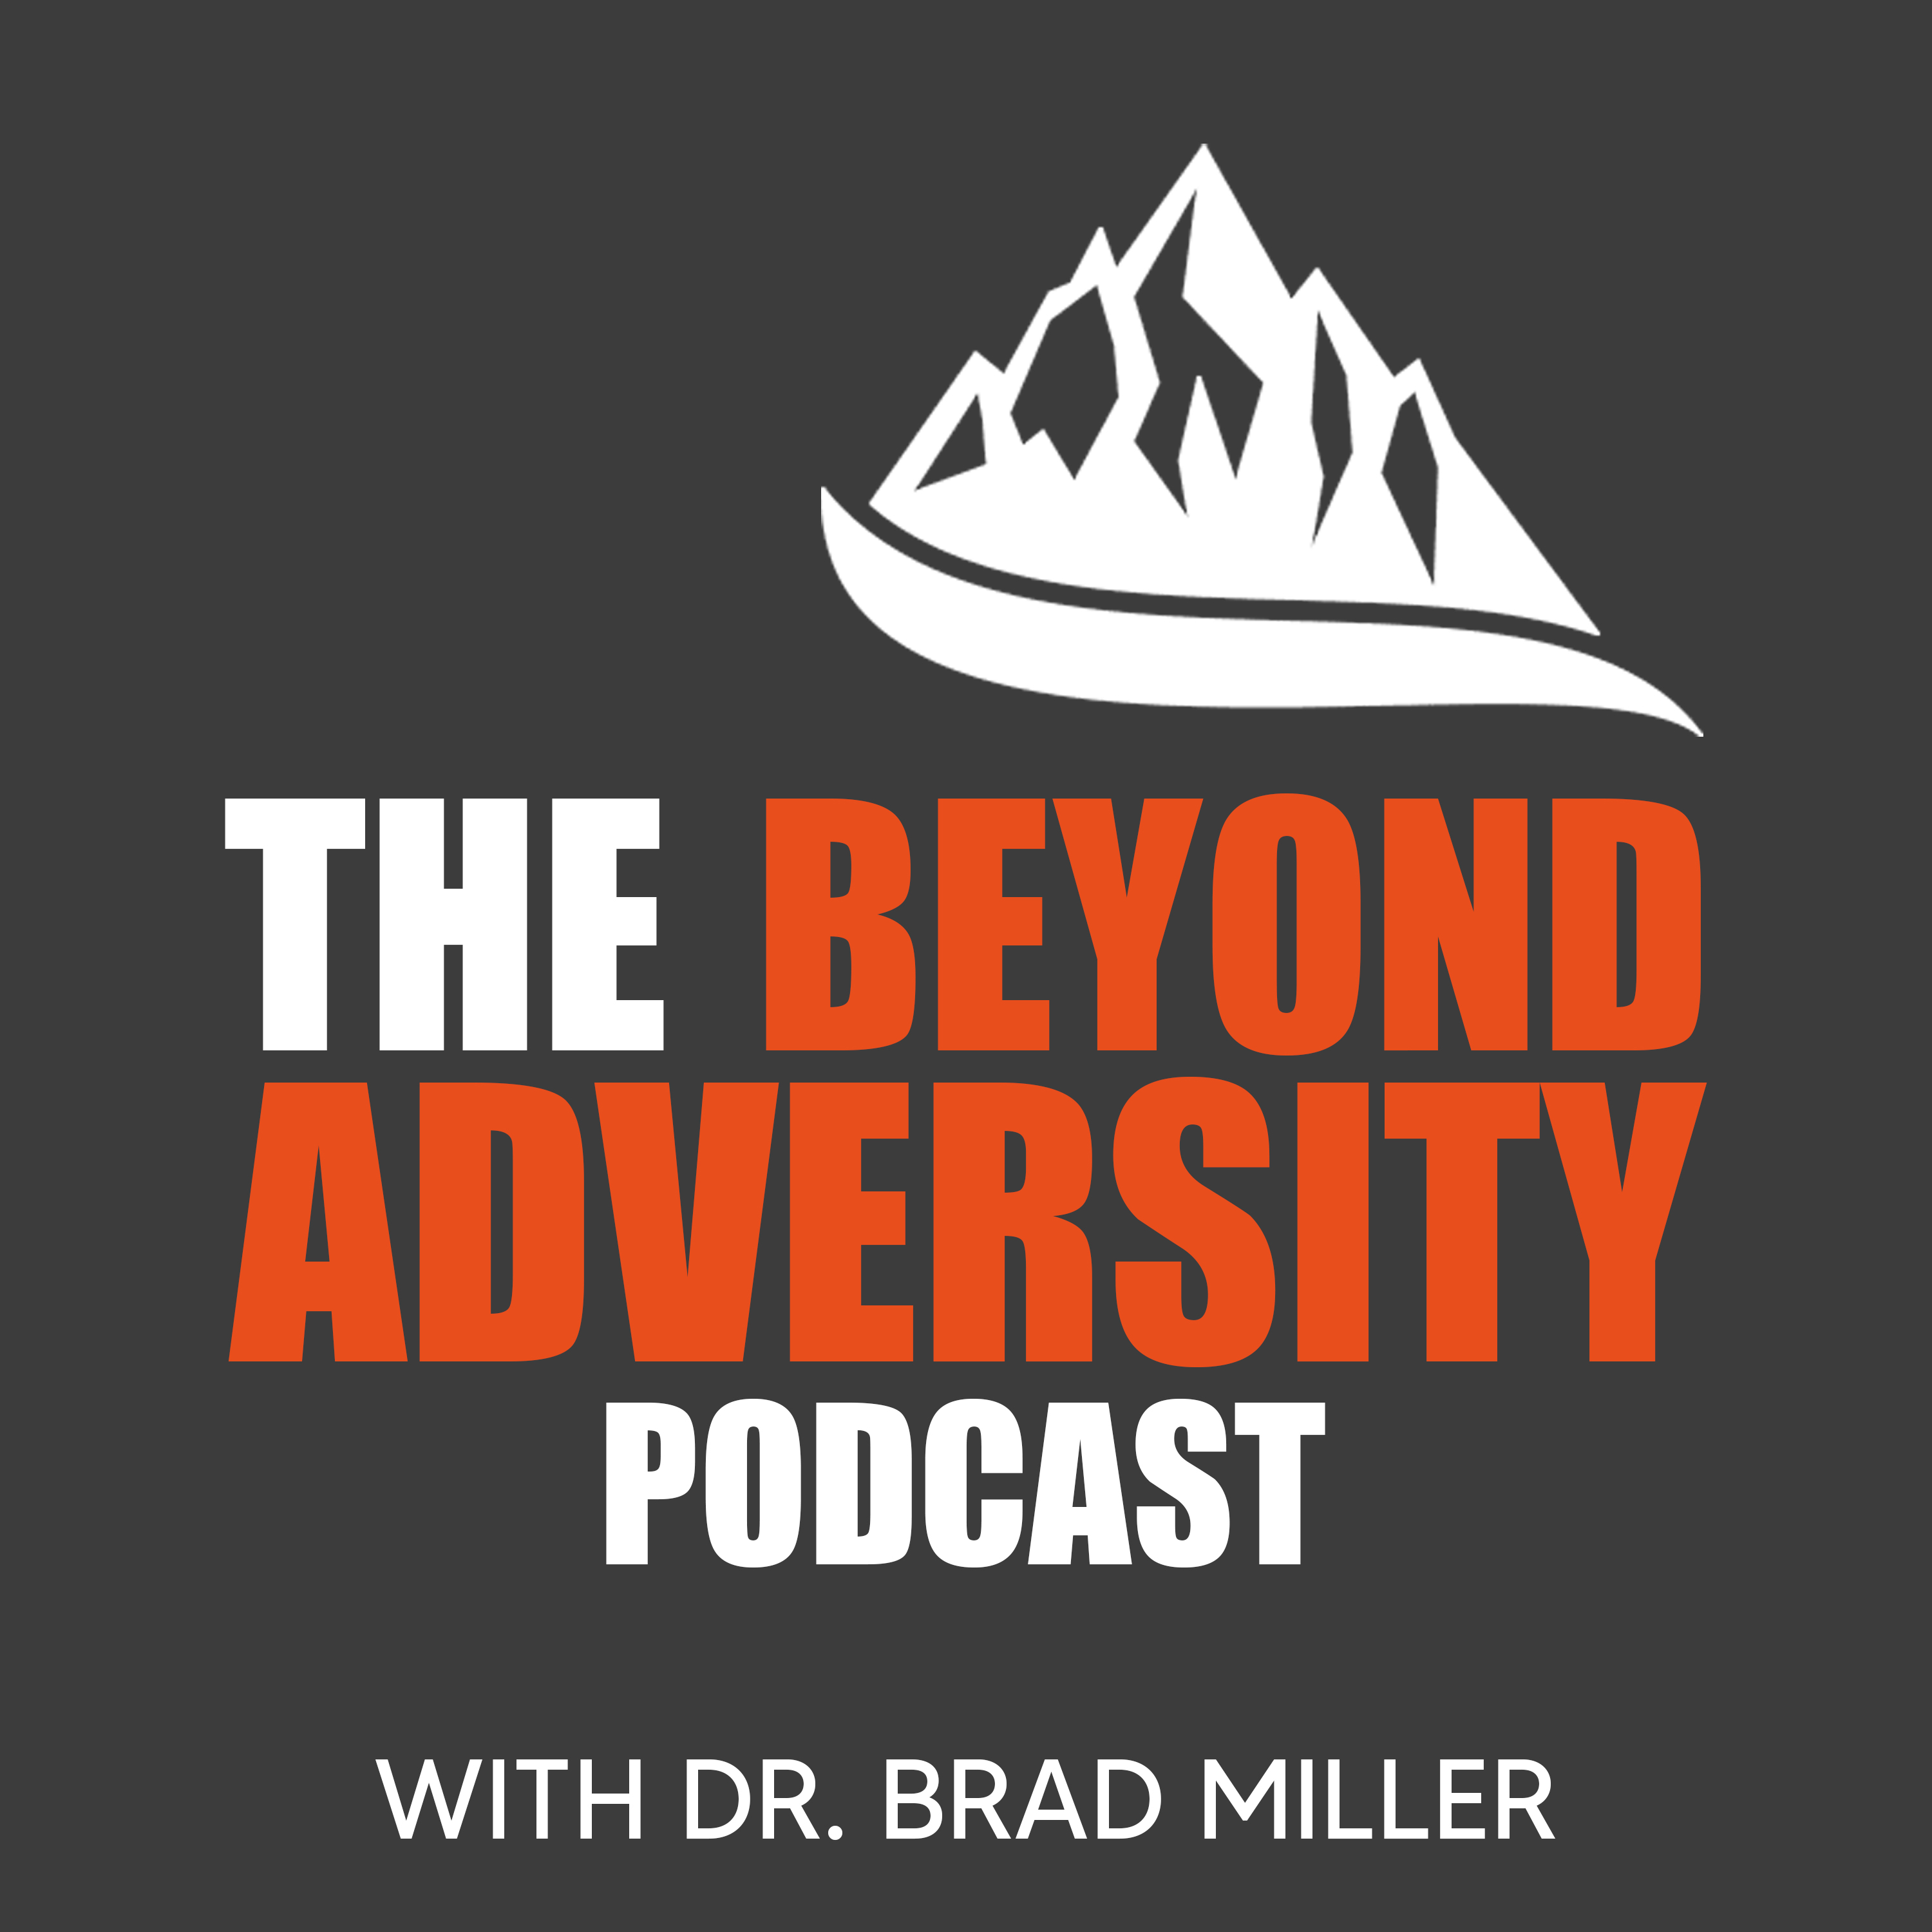 Artwork for podcast The Beyond Adversity Podcast with Dr. Brad Miller